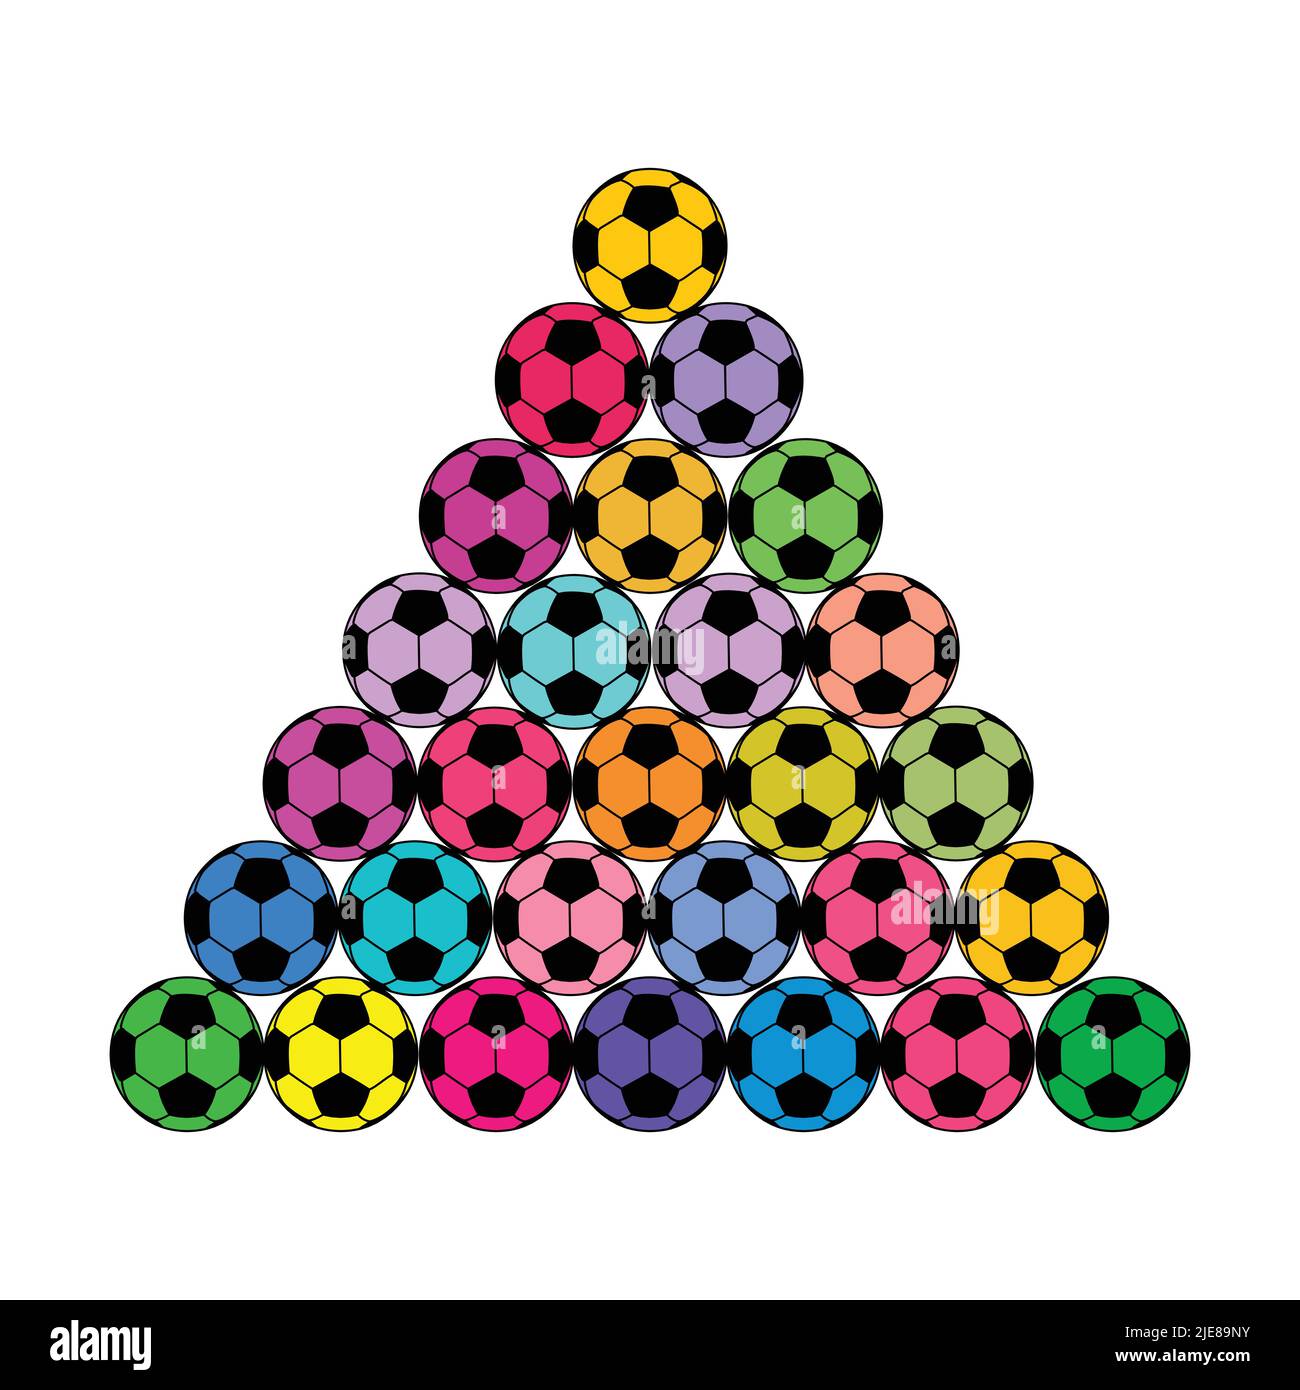 colorful Football is stacked in a pyramid type arranged. vector Stock Vector